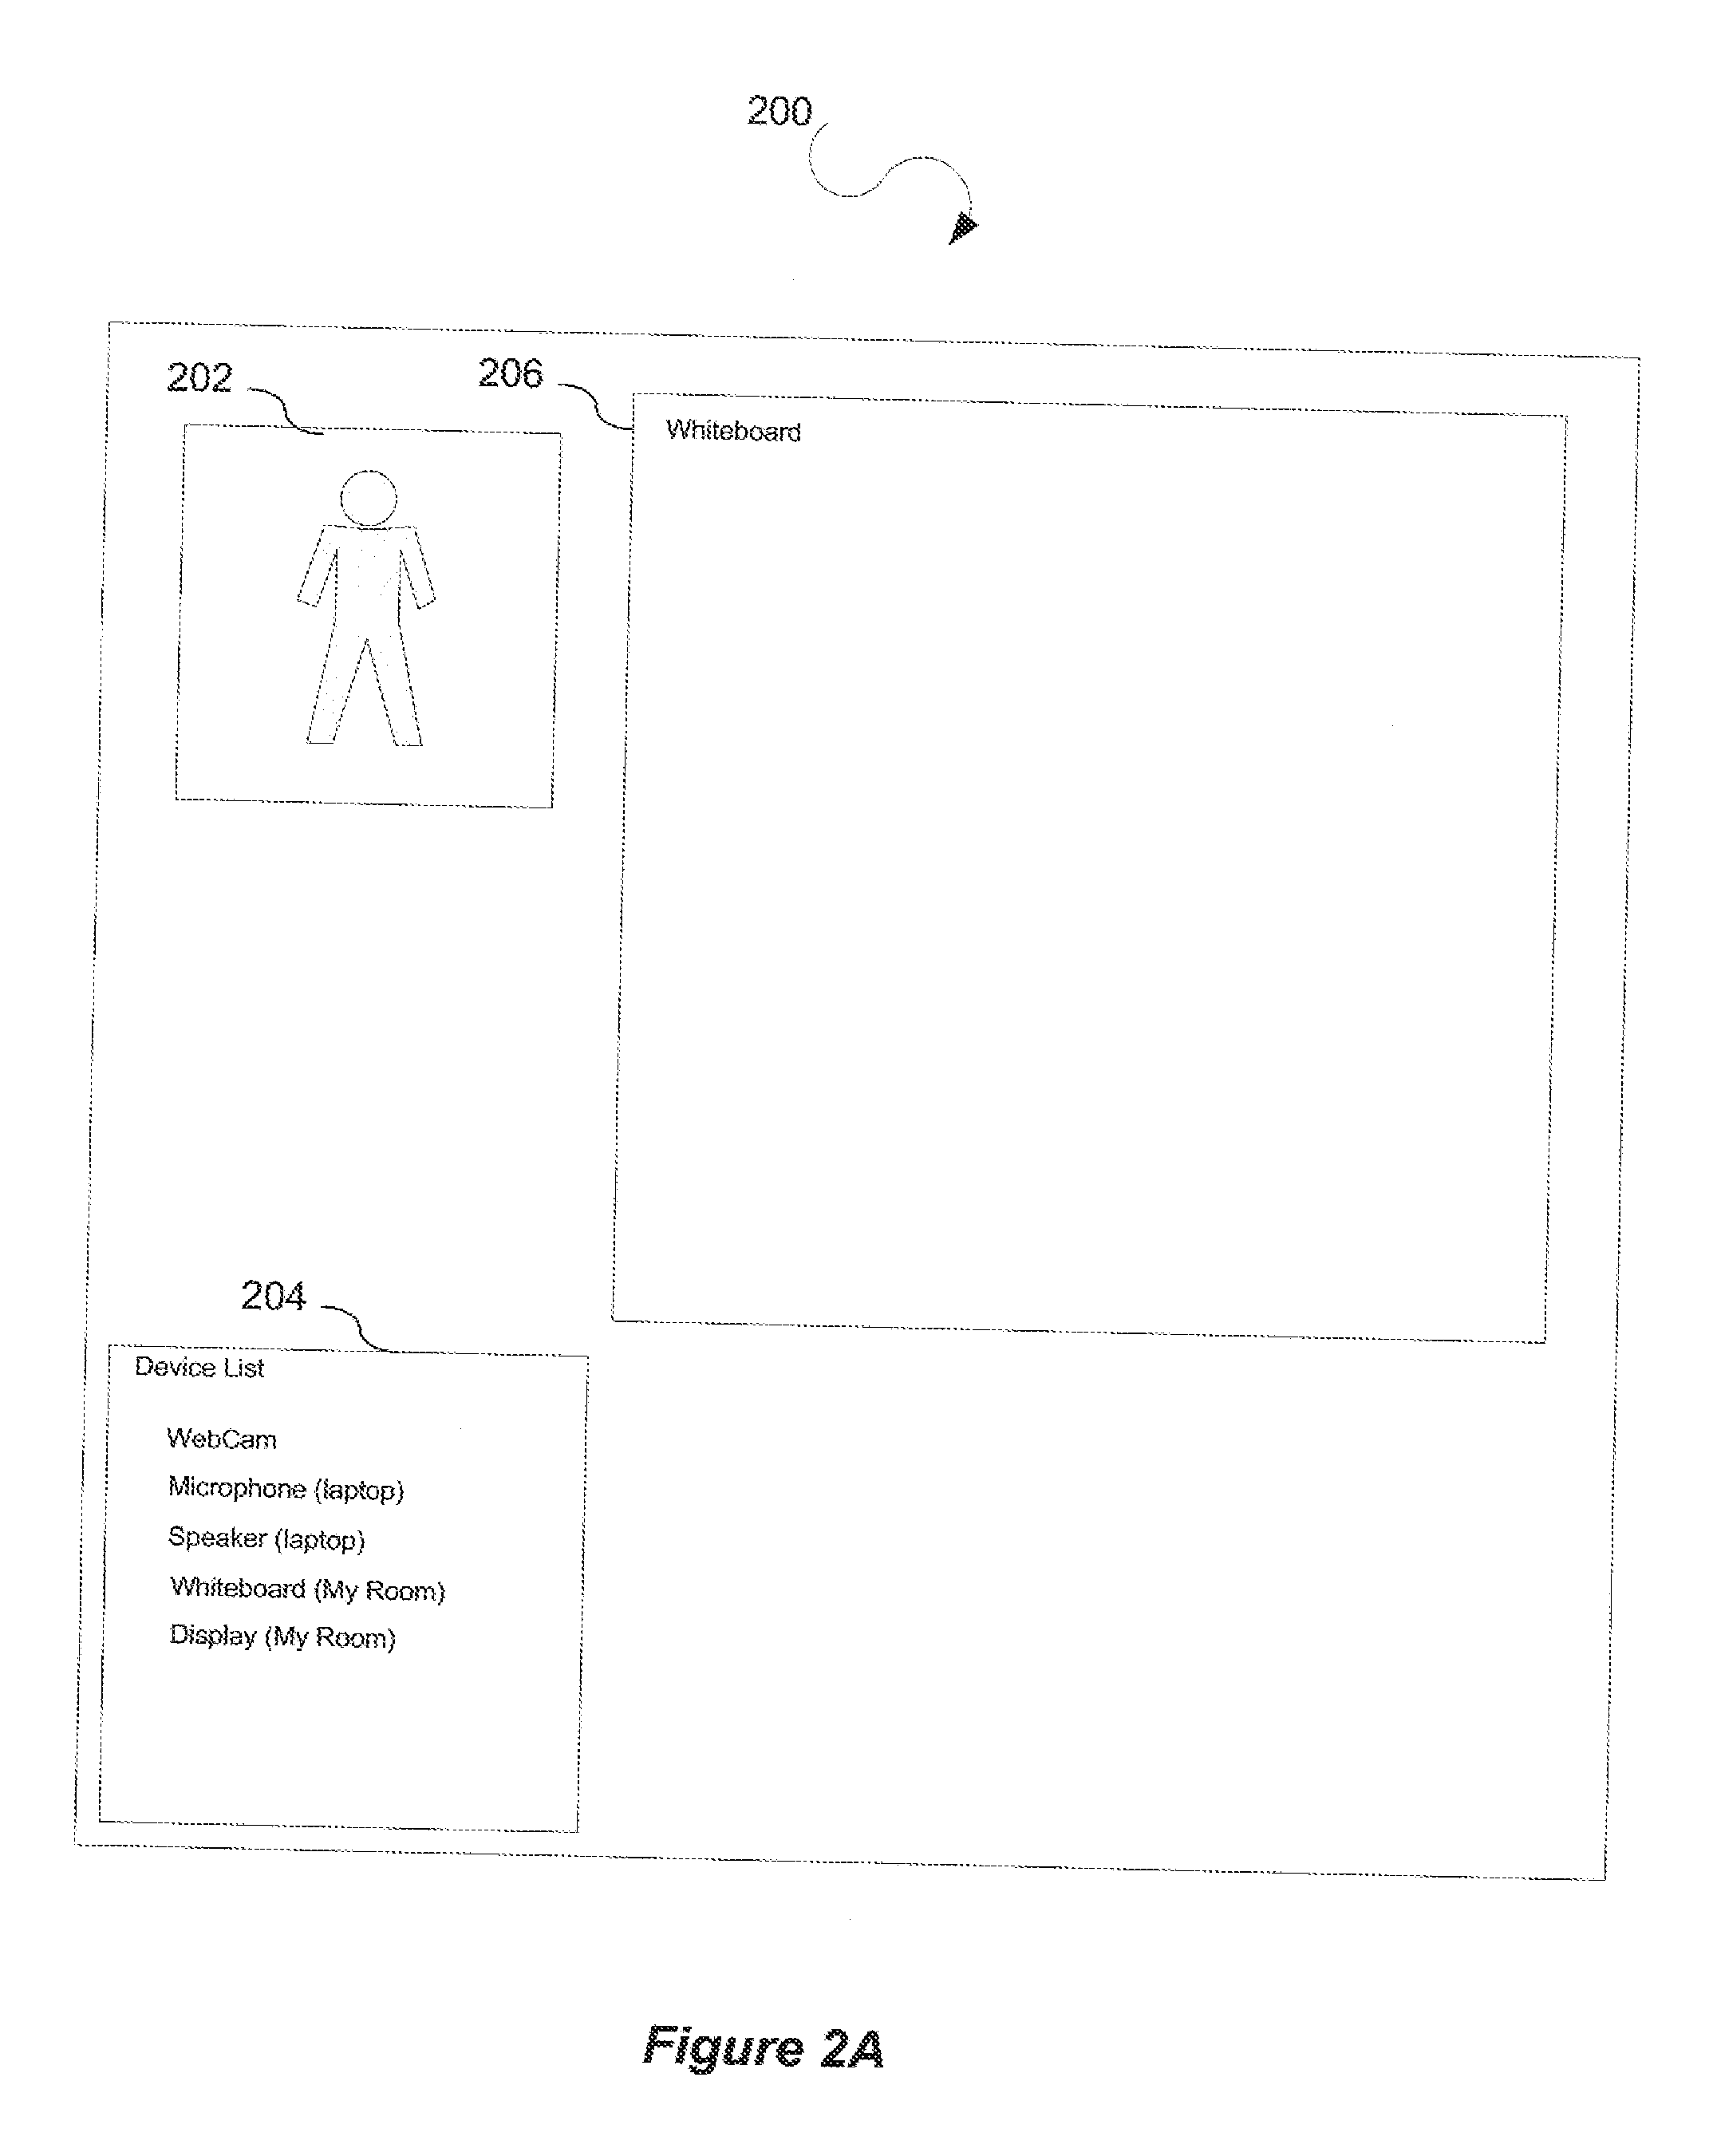 Device information index and retrieval service for scalable video conferencing